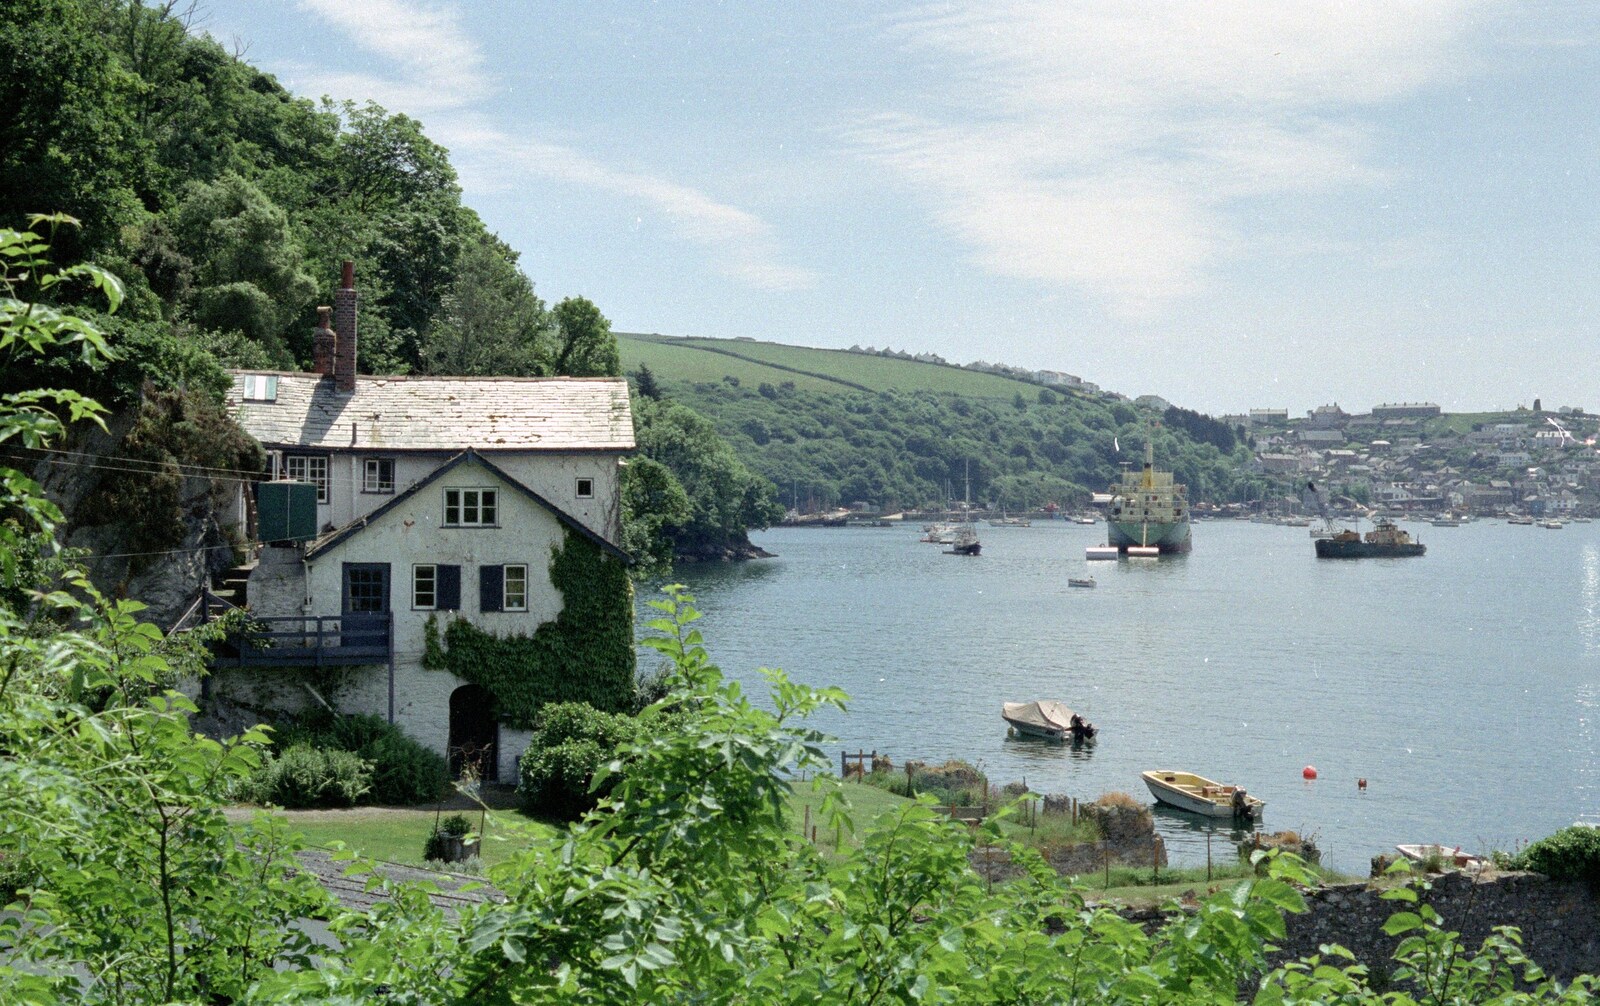 A bit more of Fowey from Uni: An End-of-it-all Trip to Land's End, Cornwall - 13th June 1989